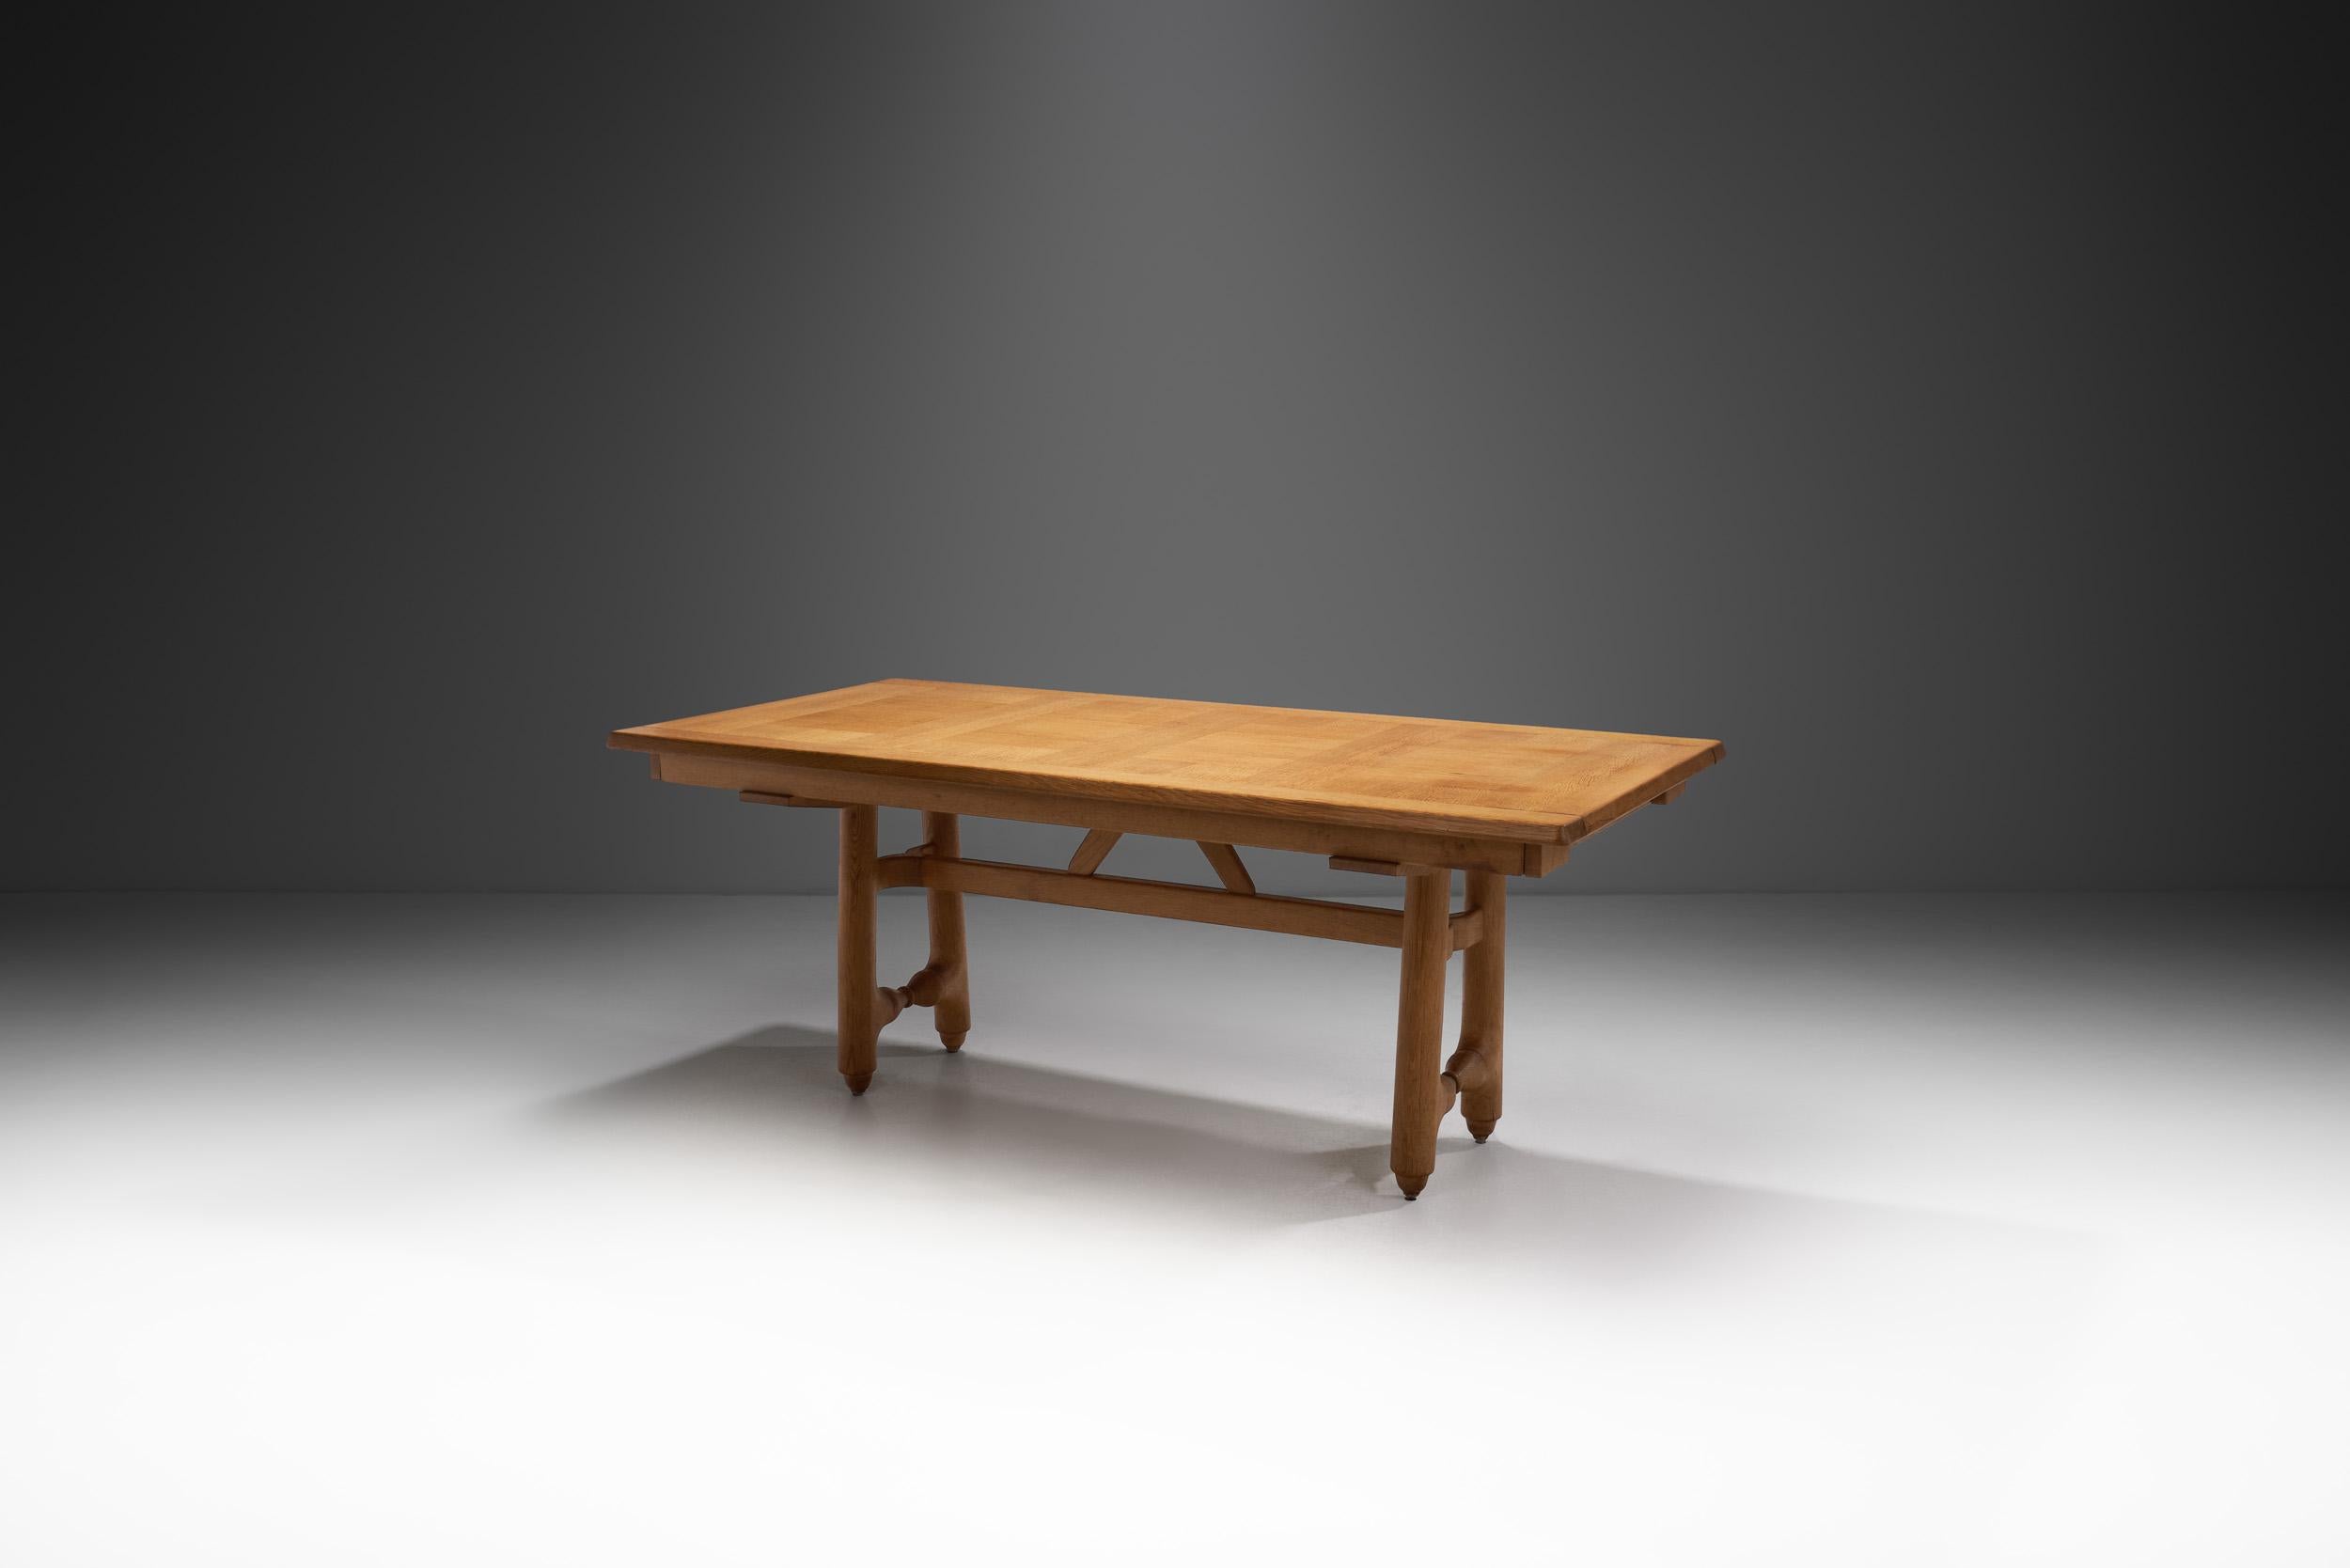 This gorgeous dining table is the two legged version of the “Gustave” model designed in 1975. Technical ingenuity and mastery are indispensable and fuel each other to achieve equally sublime and atmospheric results in Guillerme et Chambron’s